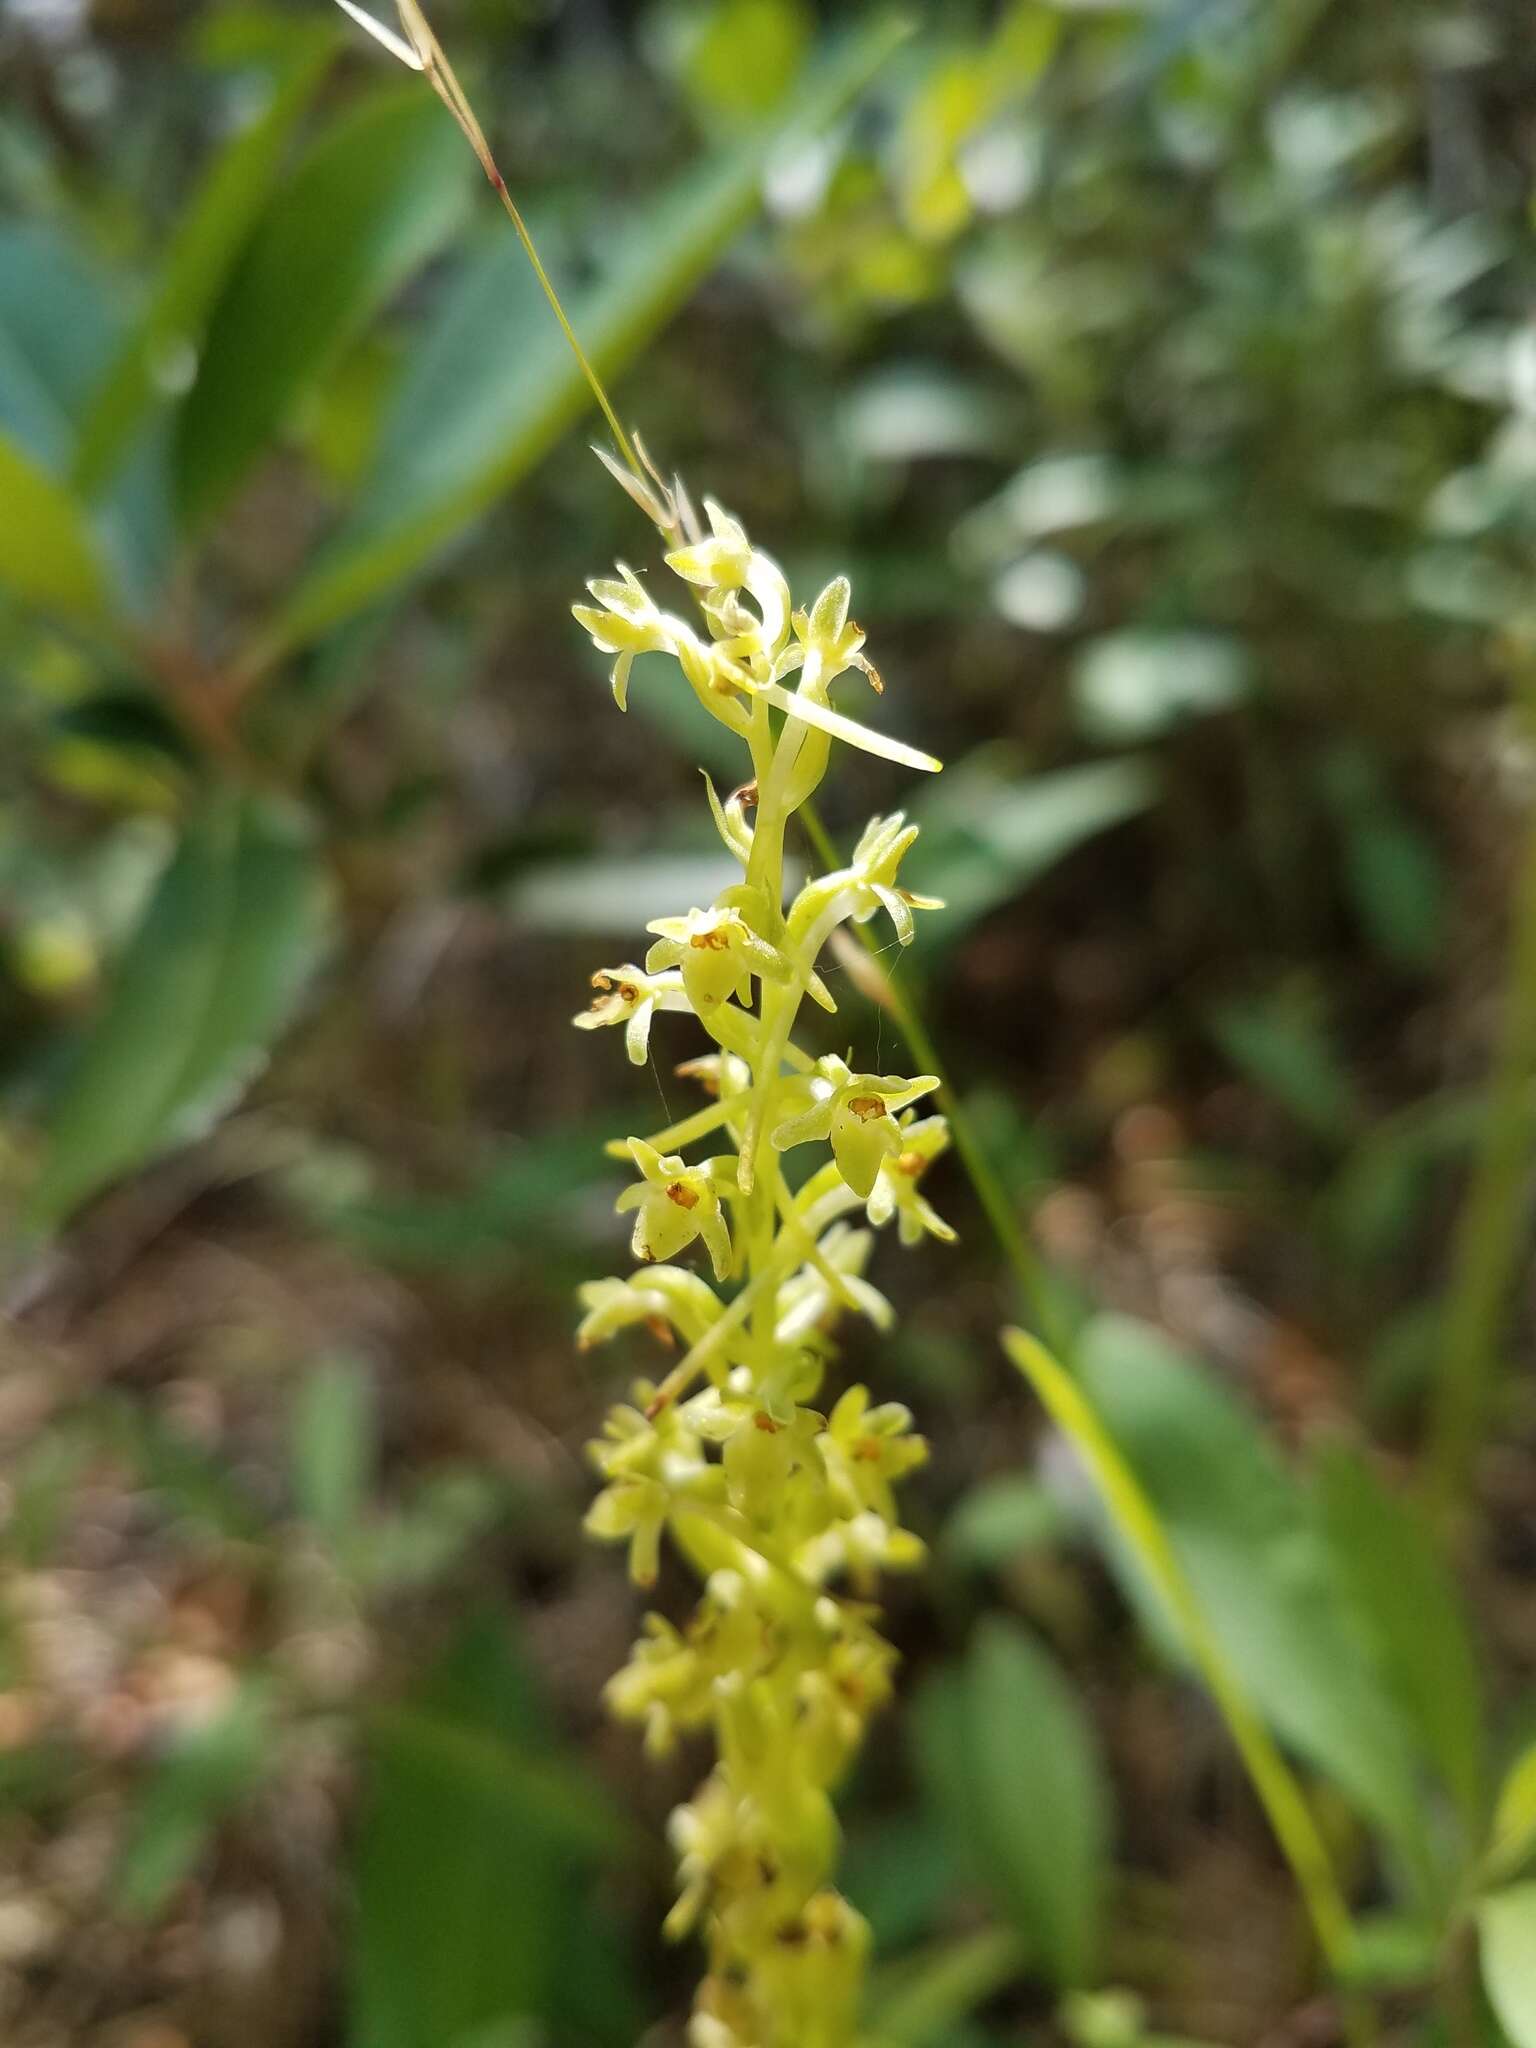 Image of Michael's rein orchid